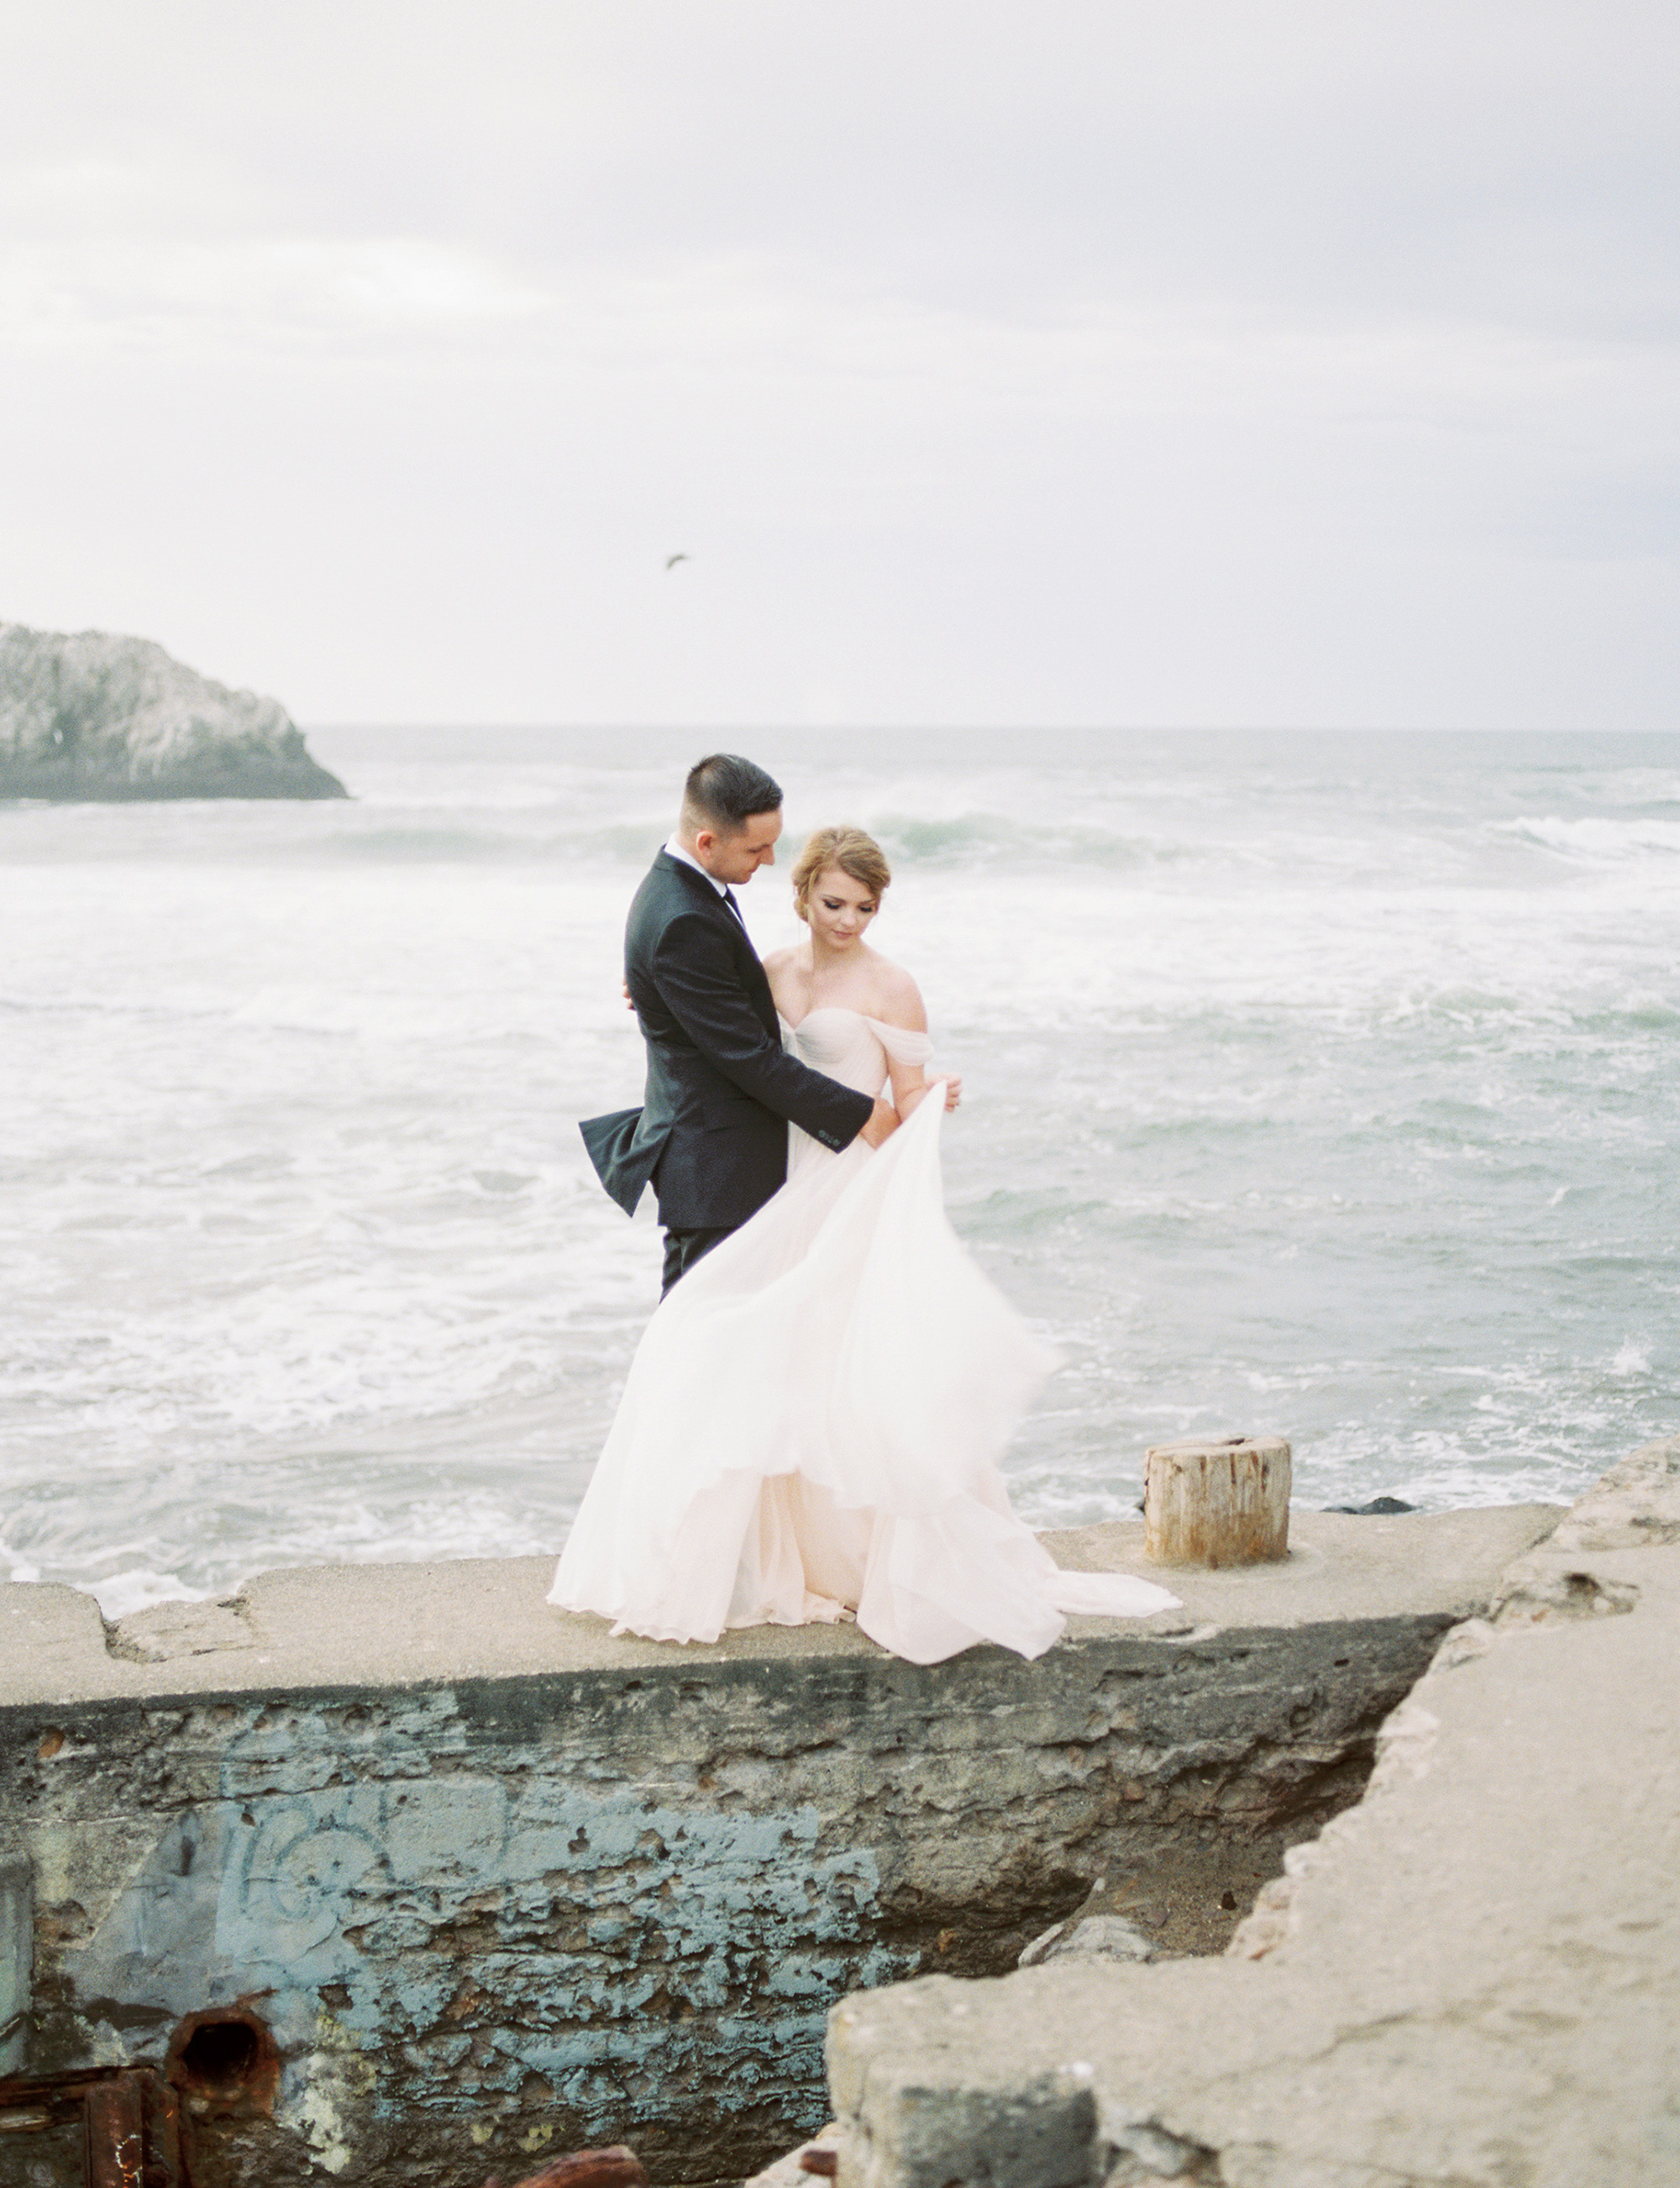 San Francisco wedding photographer Tenth & Grace specializes in dreamy images for couples in love throughout San Francisco.